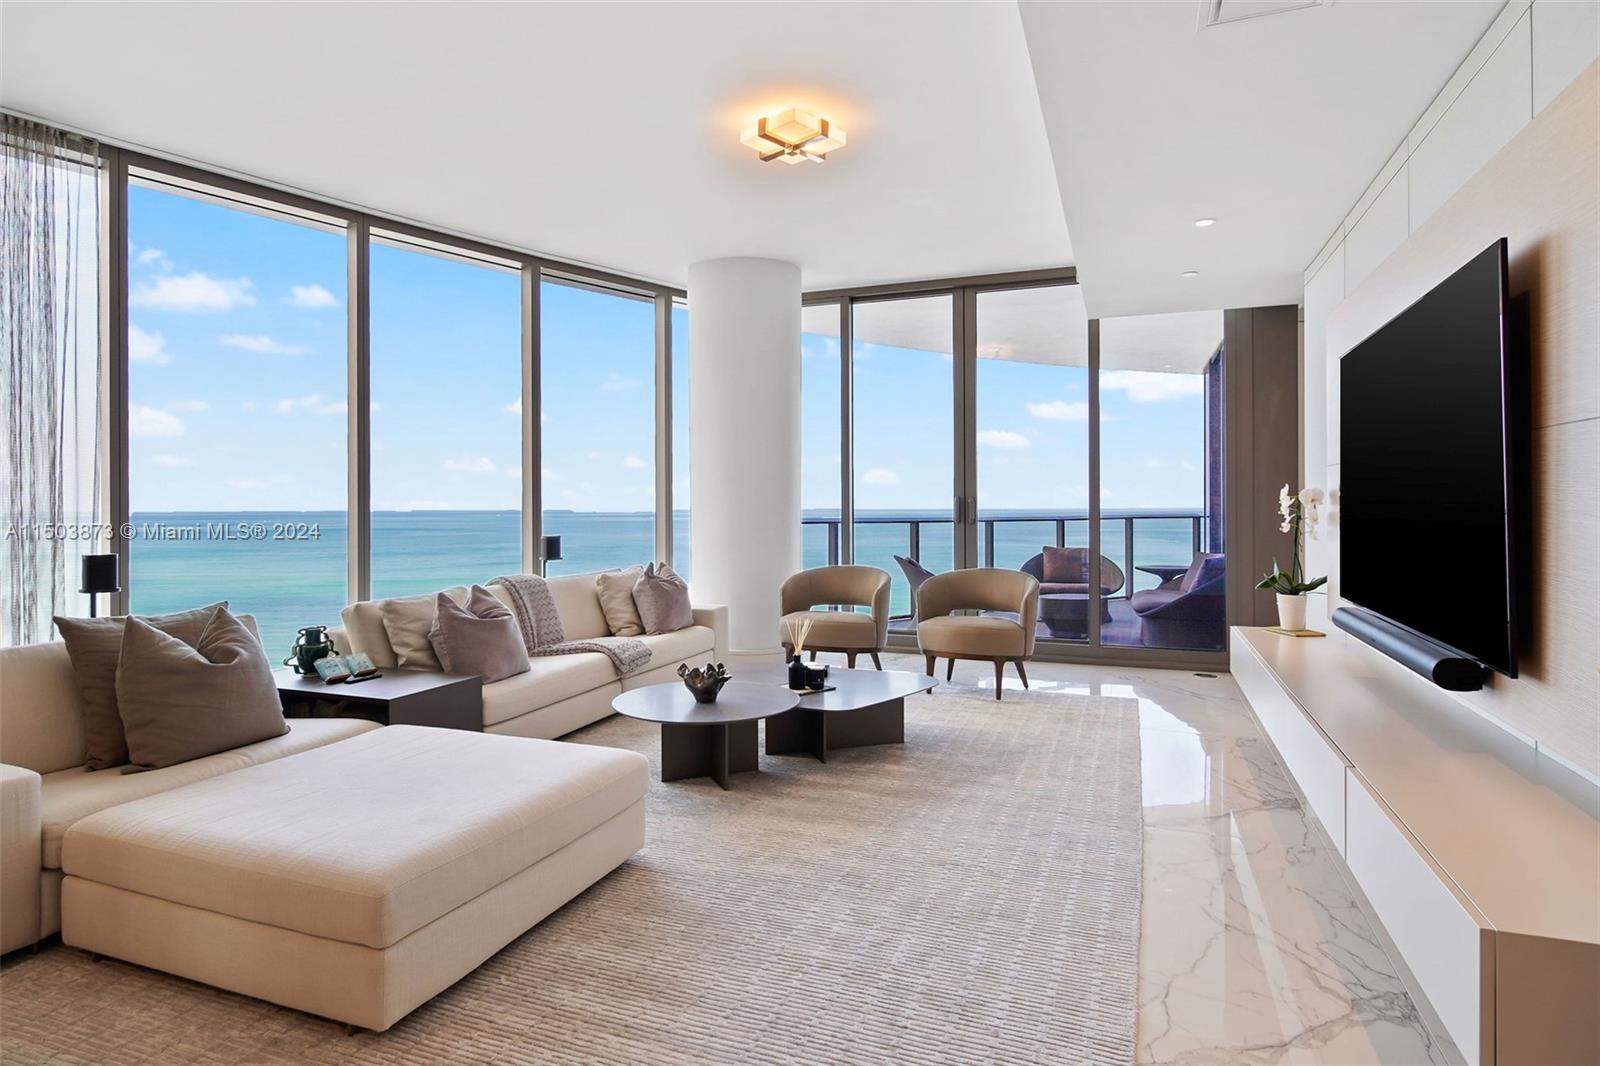 Property for Sale at 15701 Collins Ave 601, Sunny Isles Beach, Miami-Dade County, Florida - Bedrooms: 4 
Bathrooms: 5  - $5,199,000